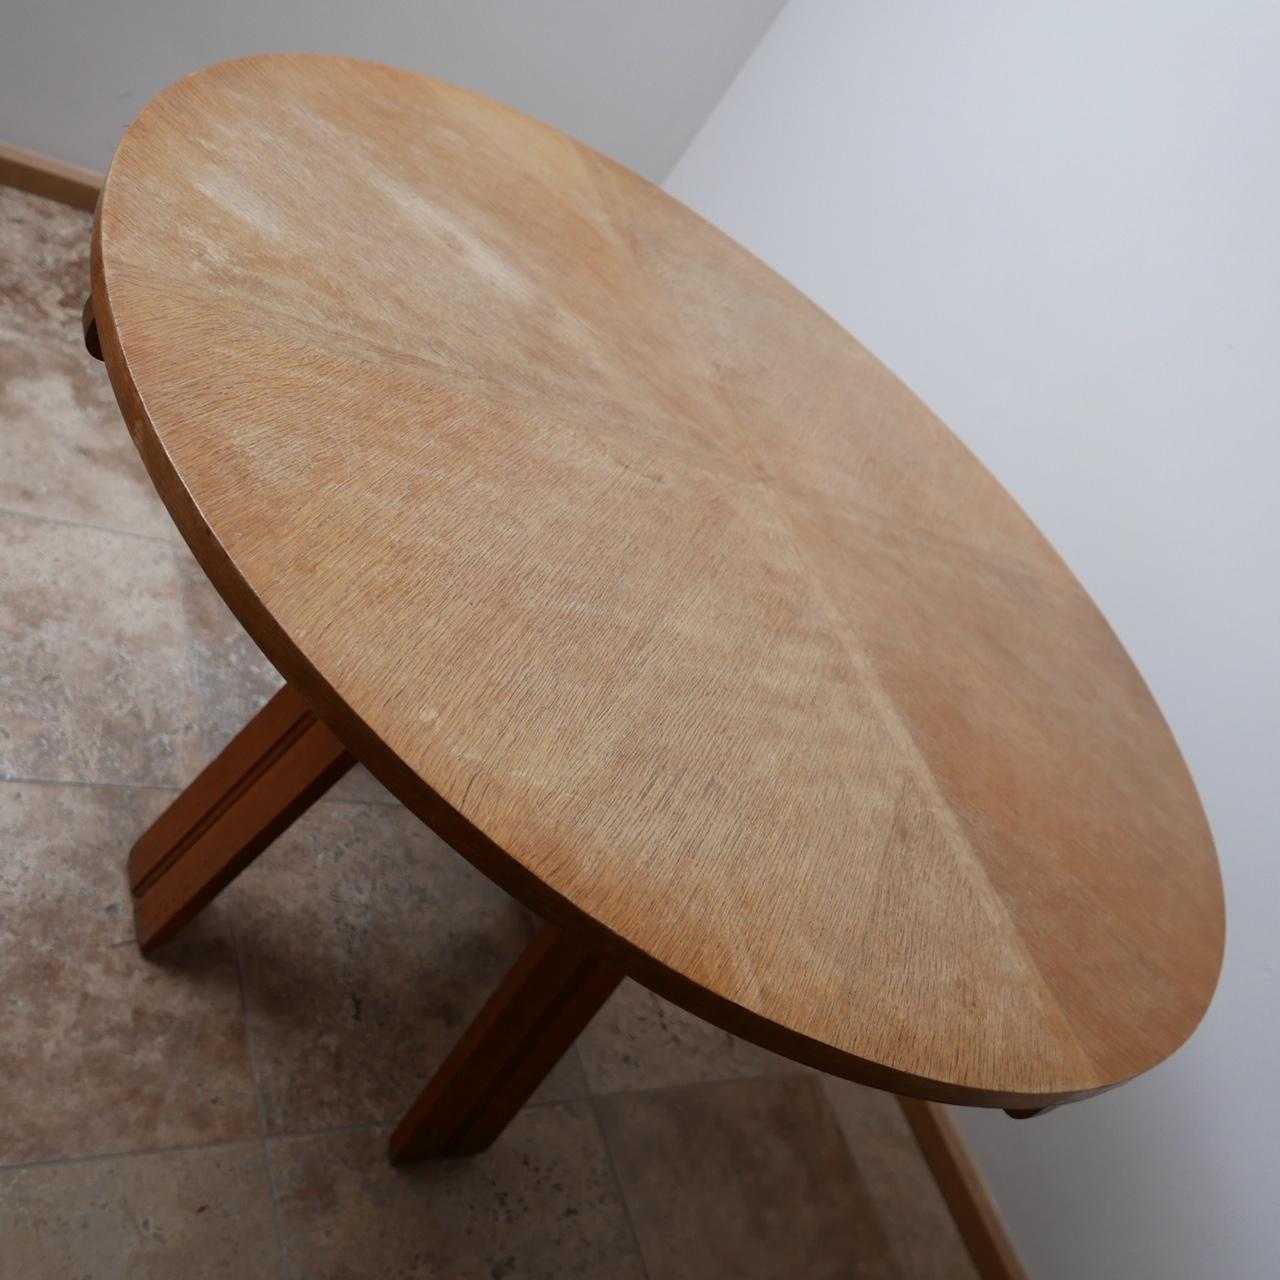 A circular dining table by French design legends Guillerme et Chambron.

A good size for a smaller room or flat. The legs of the table are removable for transport. 

Oak, circa 1960s.

Some wear to the top (see photos) but otherwise good solid